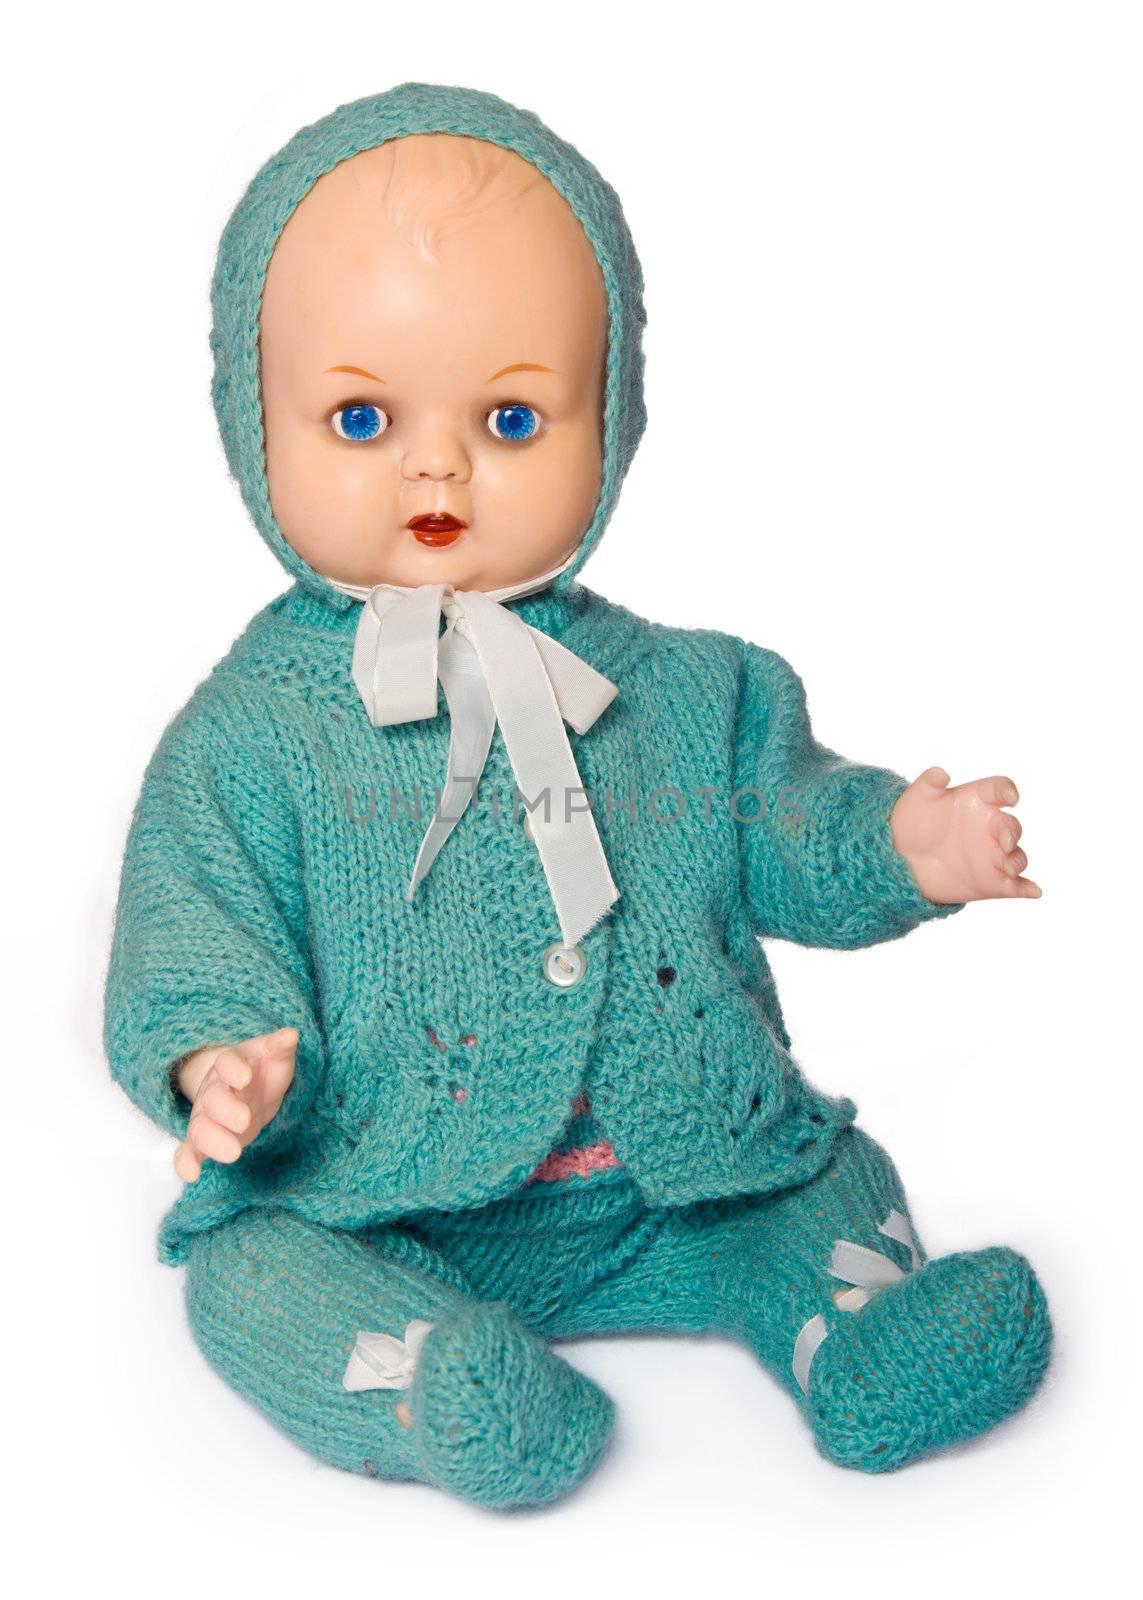 Old doll dressed in hand-knitted clothes, isolated against white